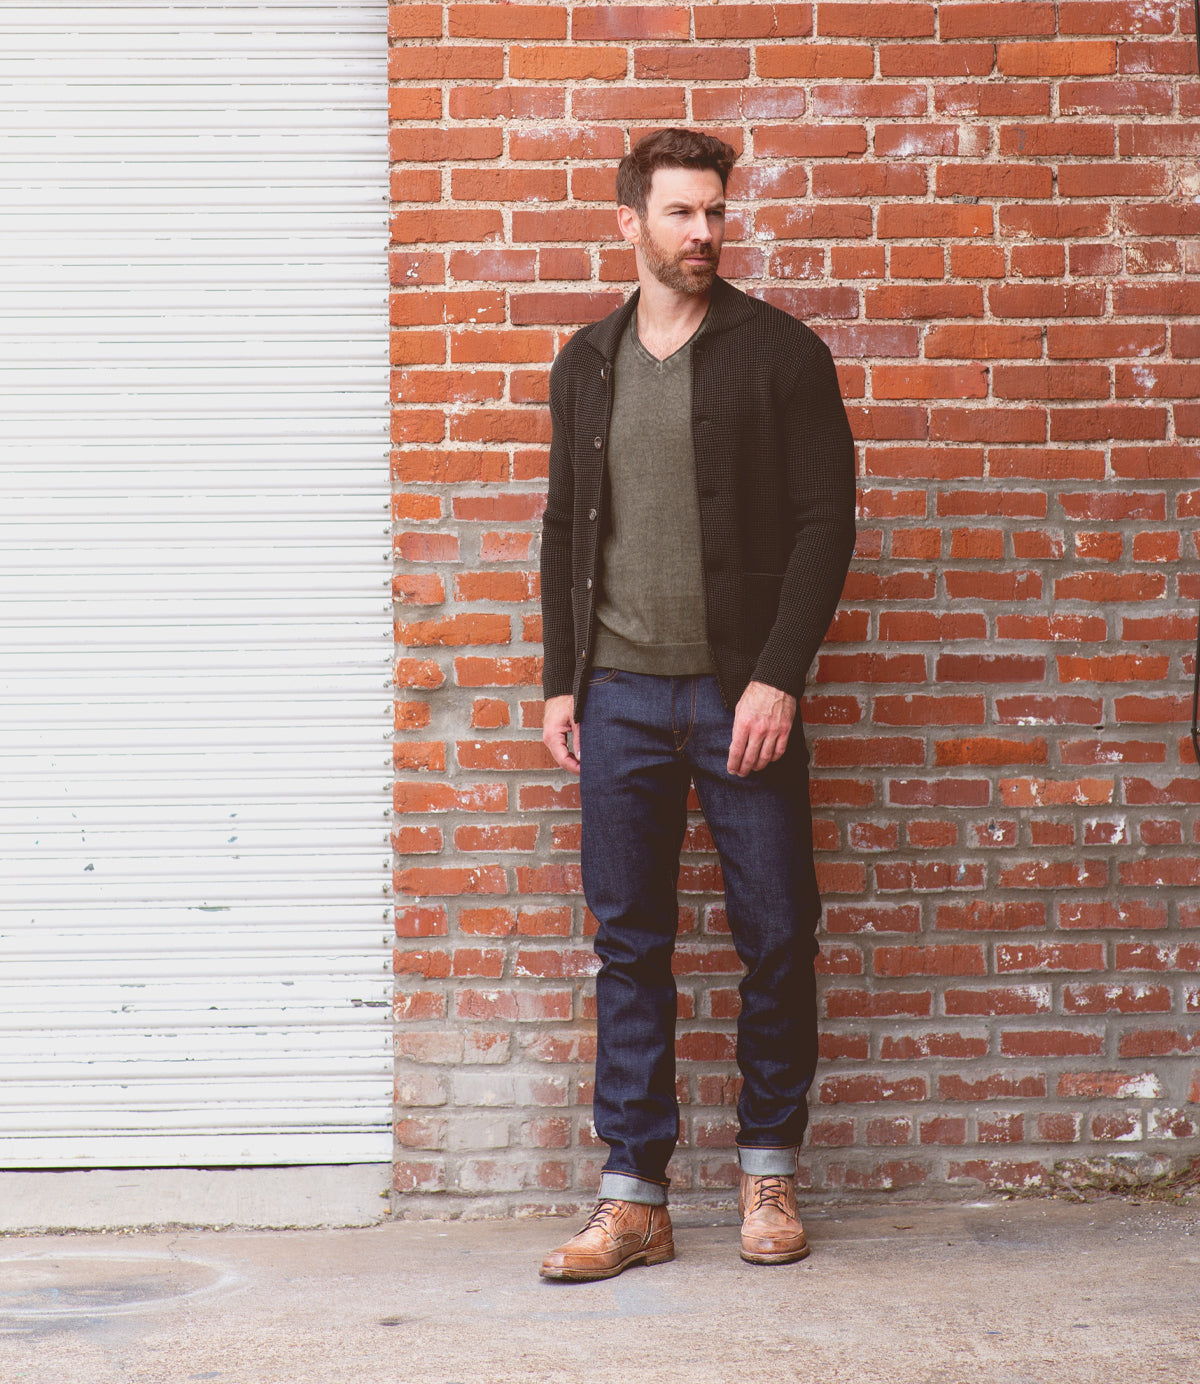 A man is wearing new Bed Stu leather lace-up ankle boots and standing in front of a brick wall.